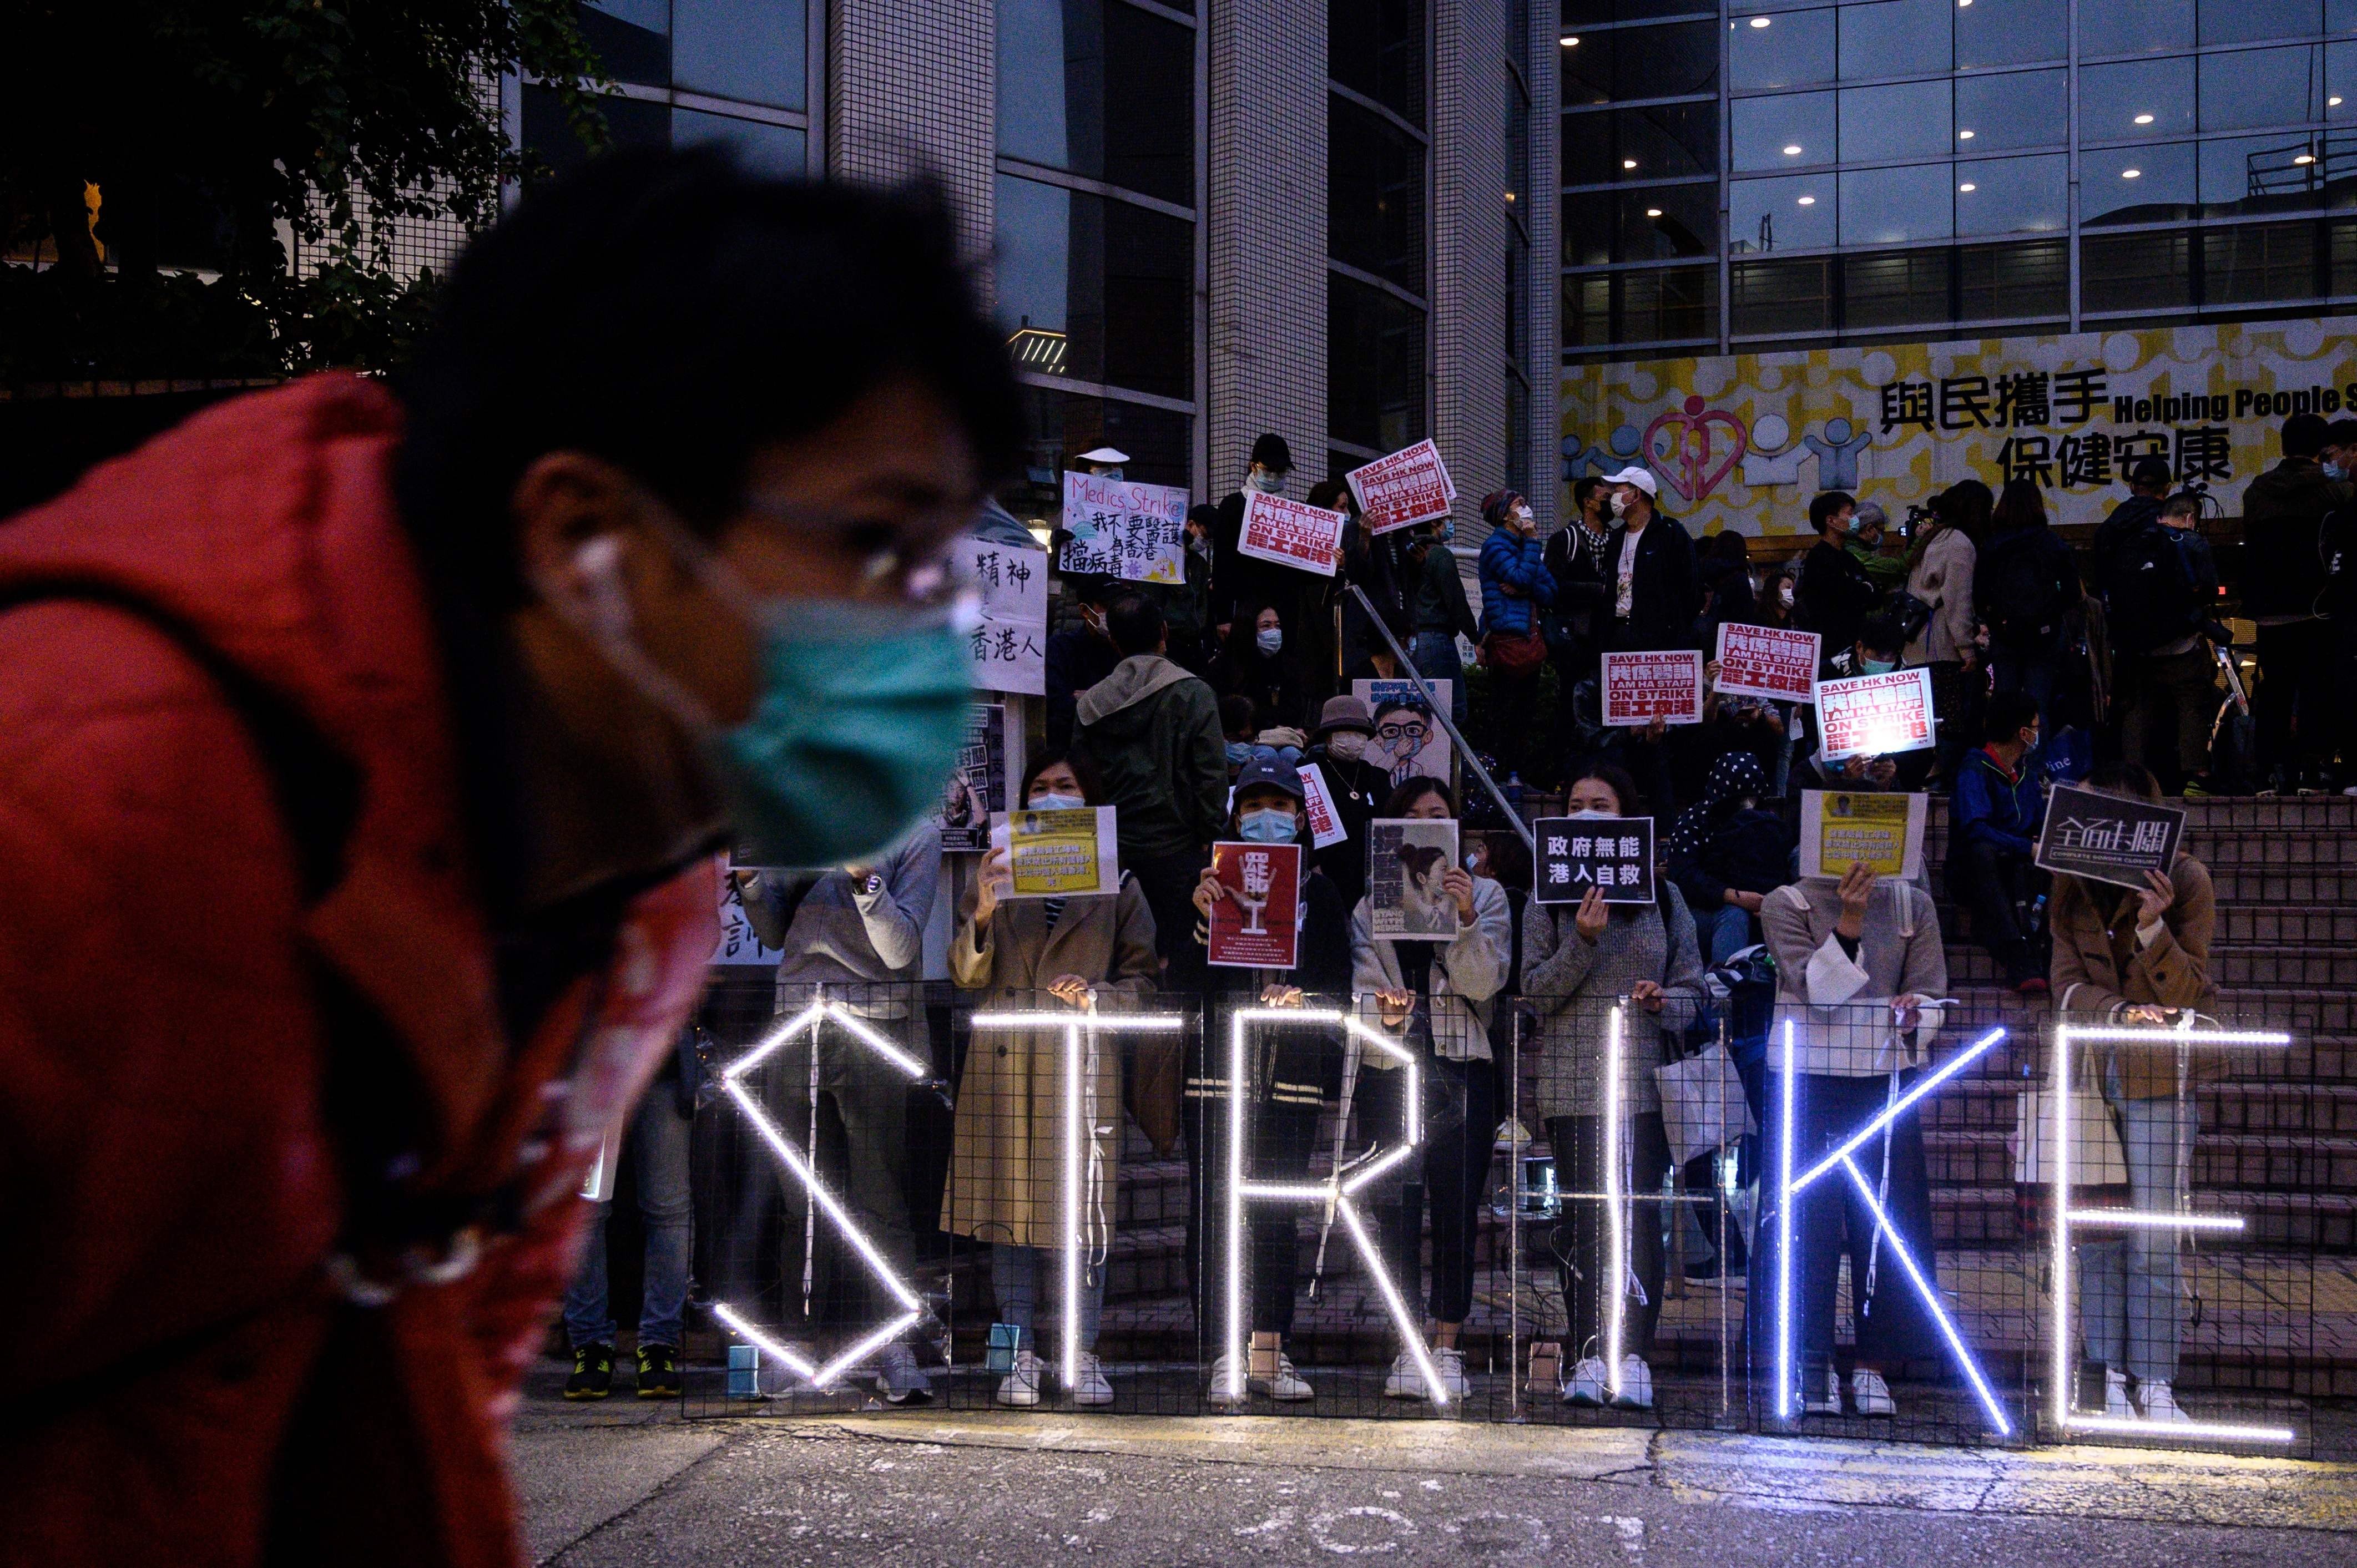 Striking members of the Hospital Authority Employees Alliance and other activists gather at the Hospital Authority building on February 7, calling for the closing of Hong Kong’s border with the mainland. Photo: AFP